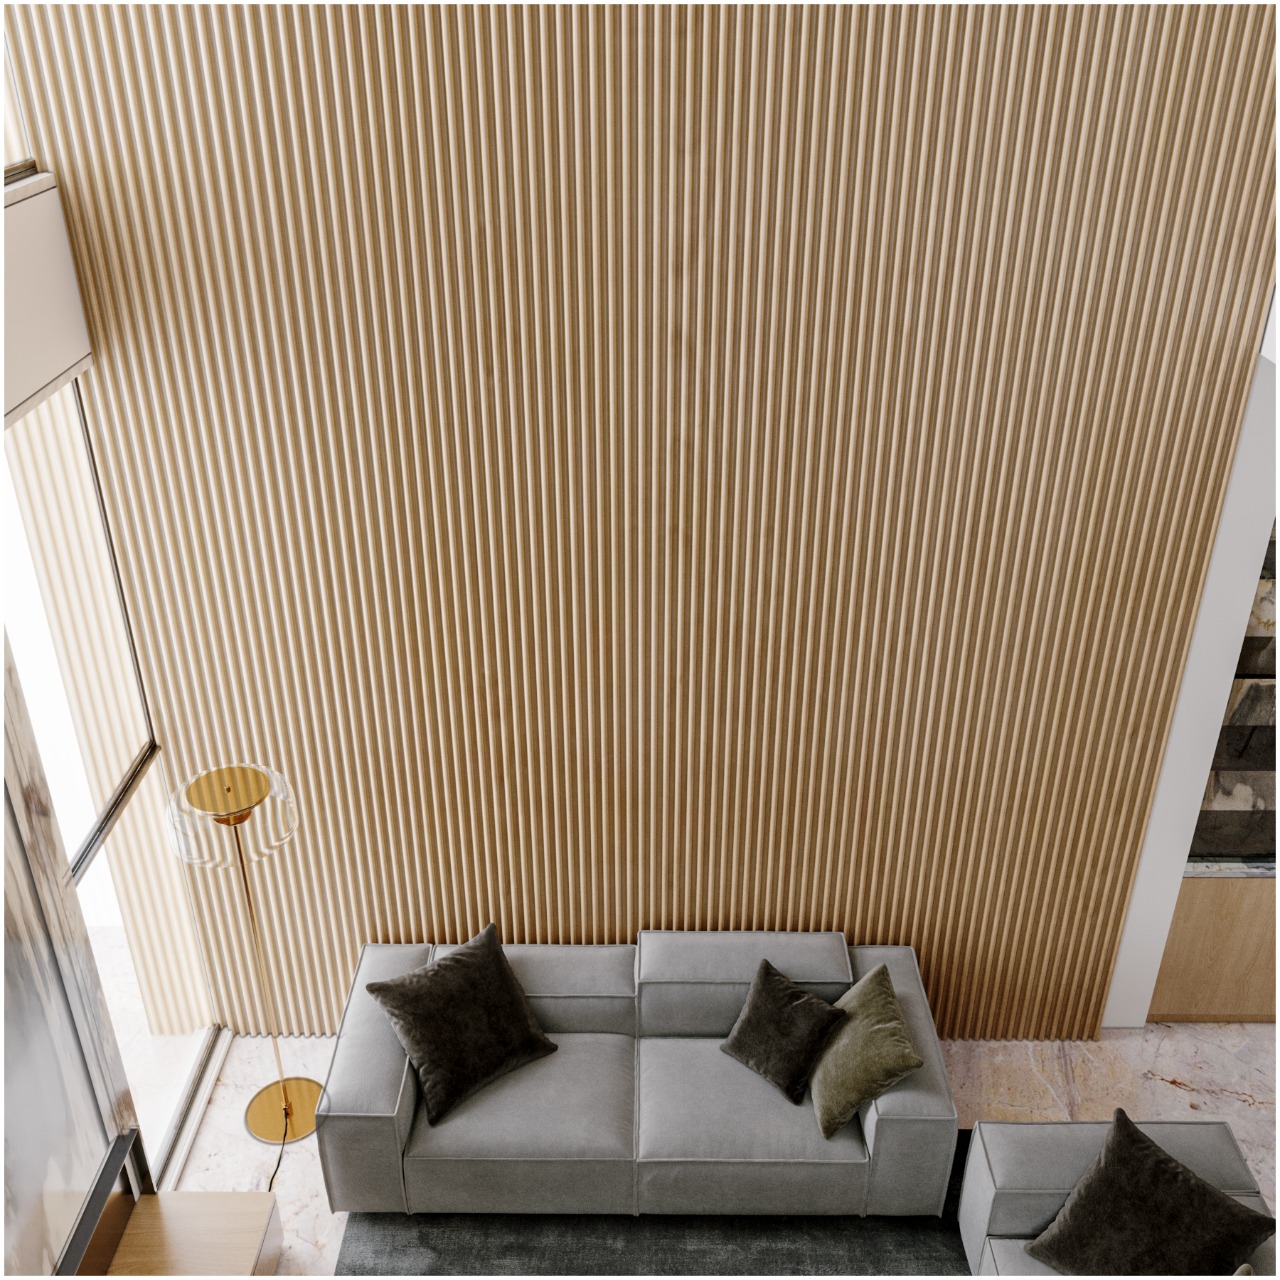 Fluted wooden panel wall